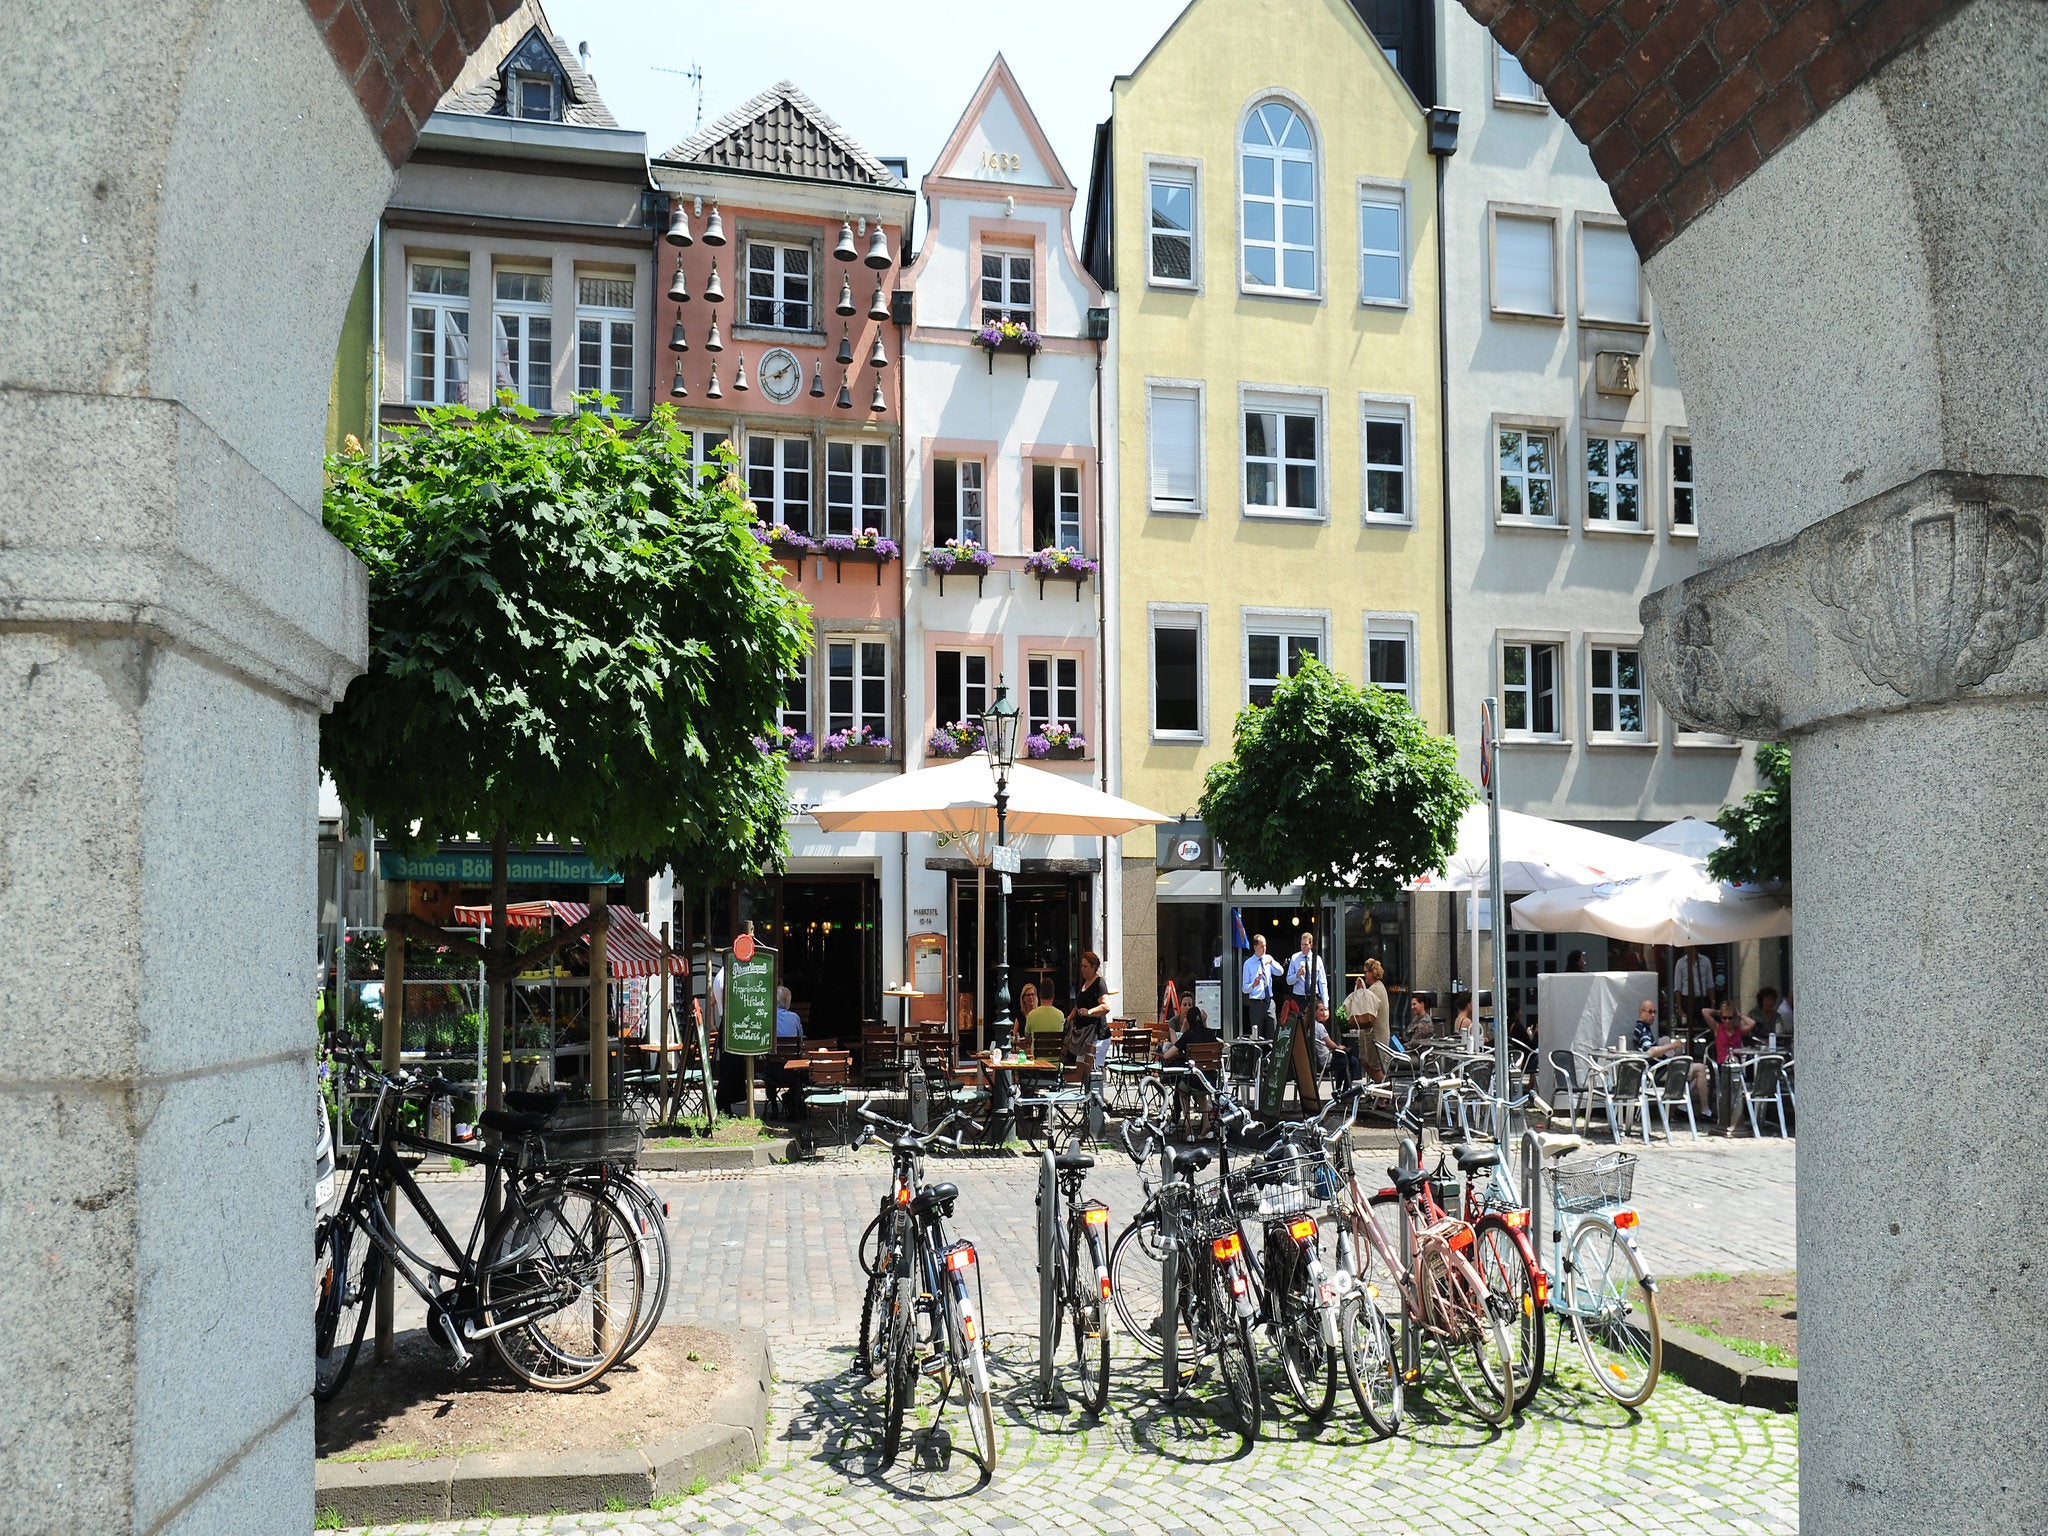 Cycling city: Dusseldorf’s Old Town, where biking is increasingly popular thanks to improved networks and facilities